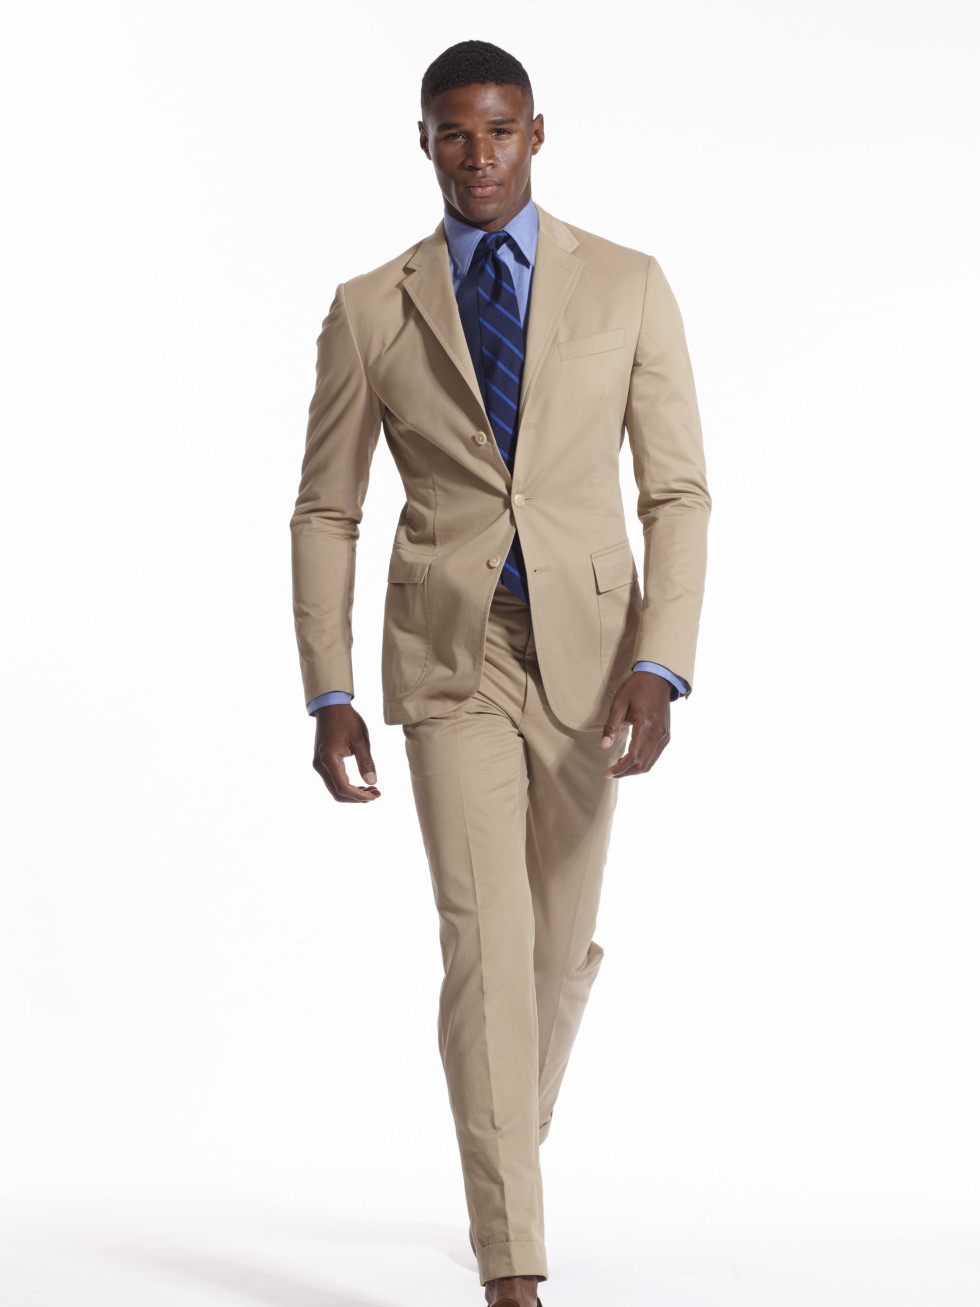 Polo Ralph Lauren offers men stylish ways to dress for any occasion ...